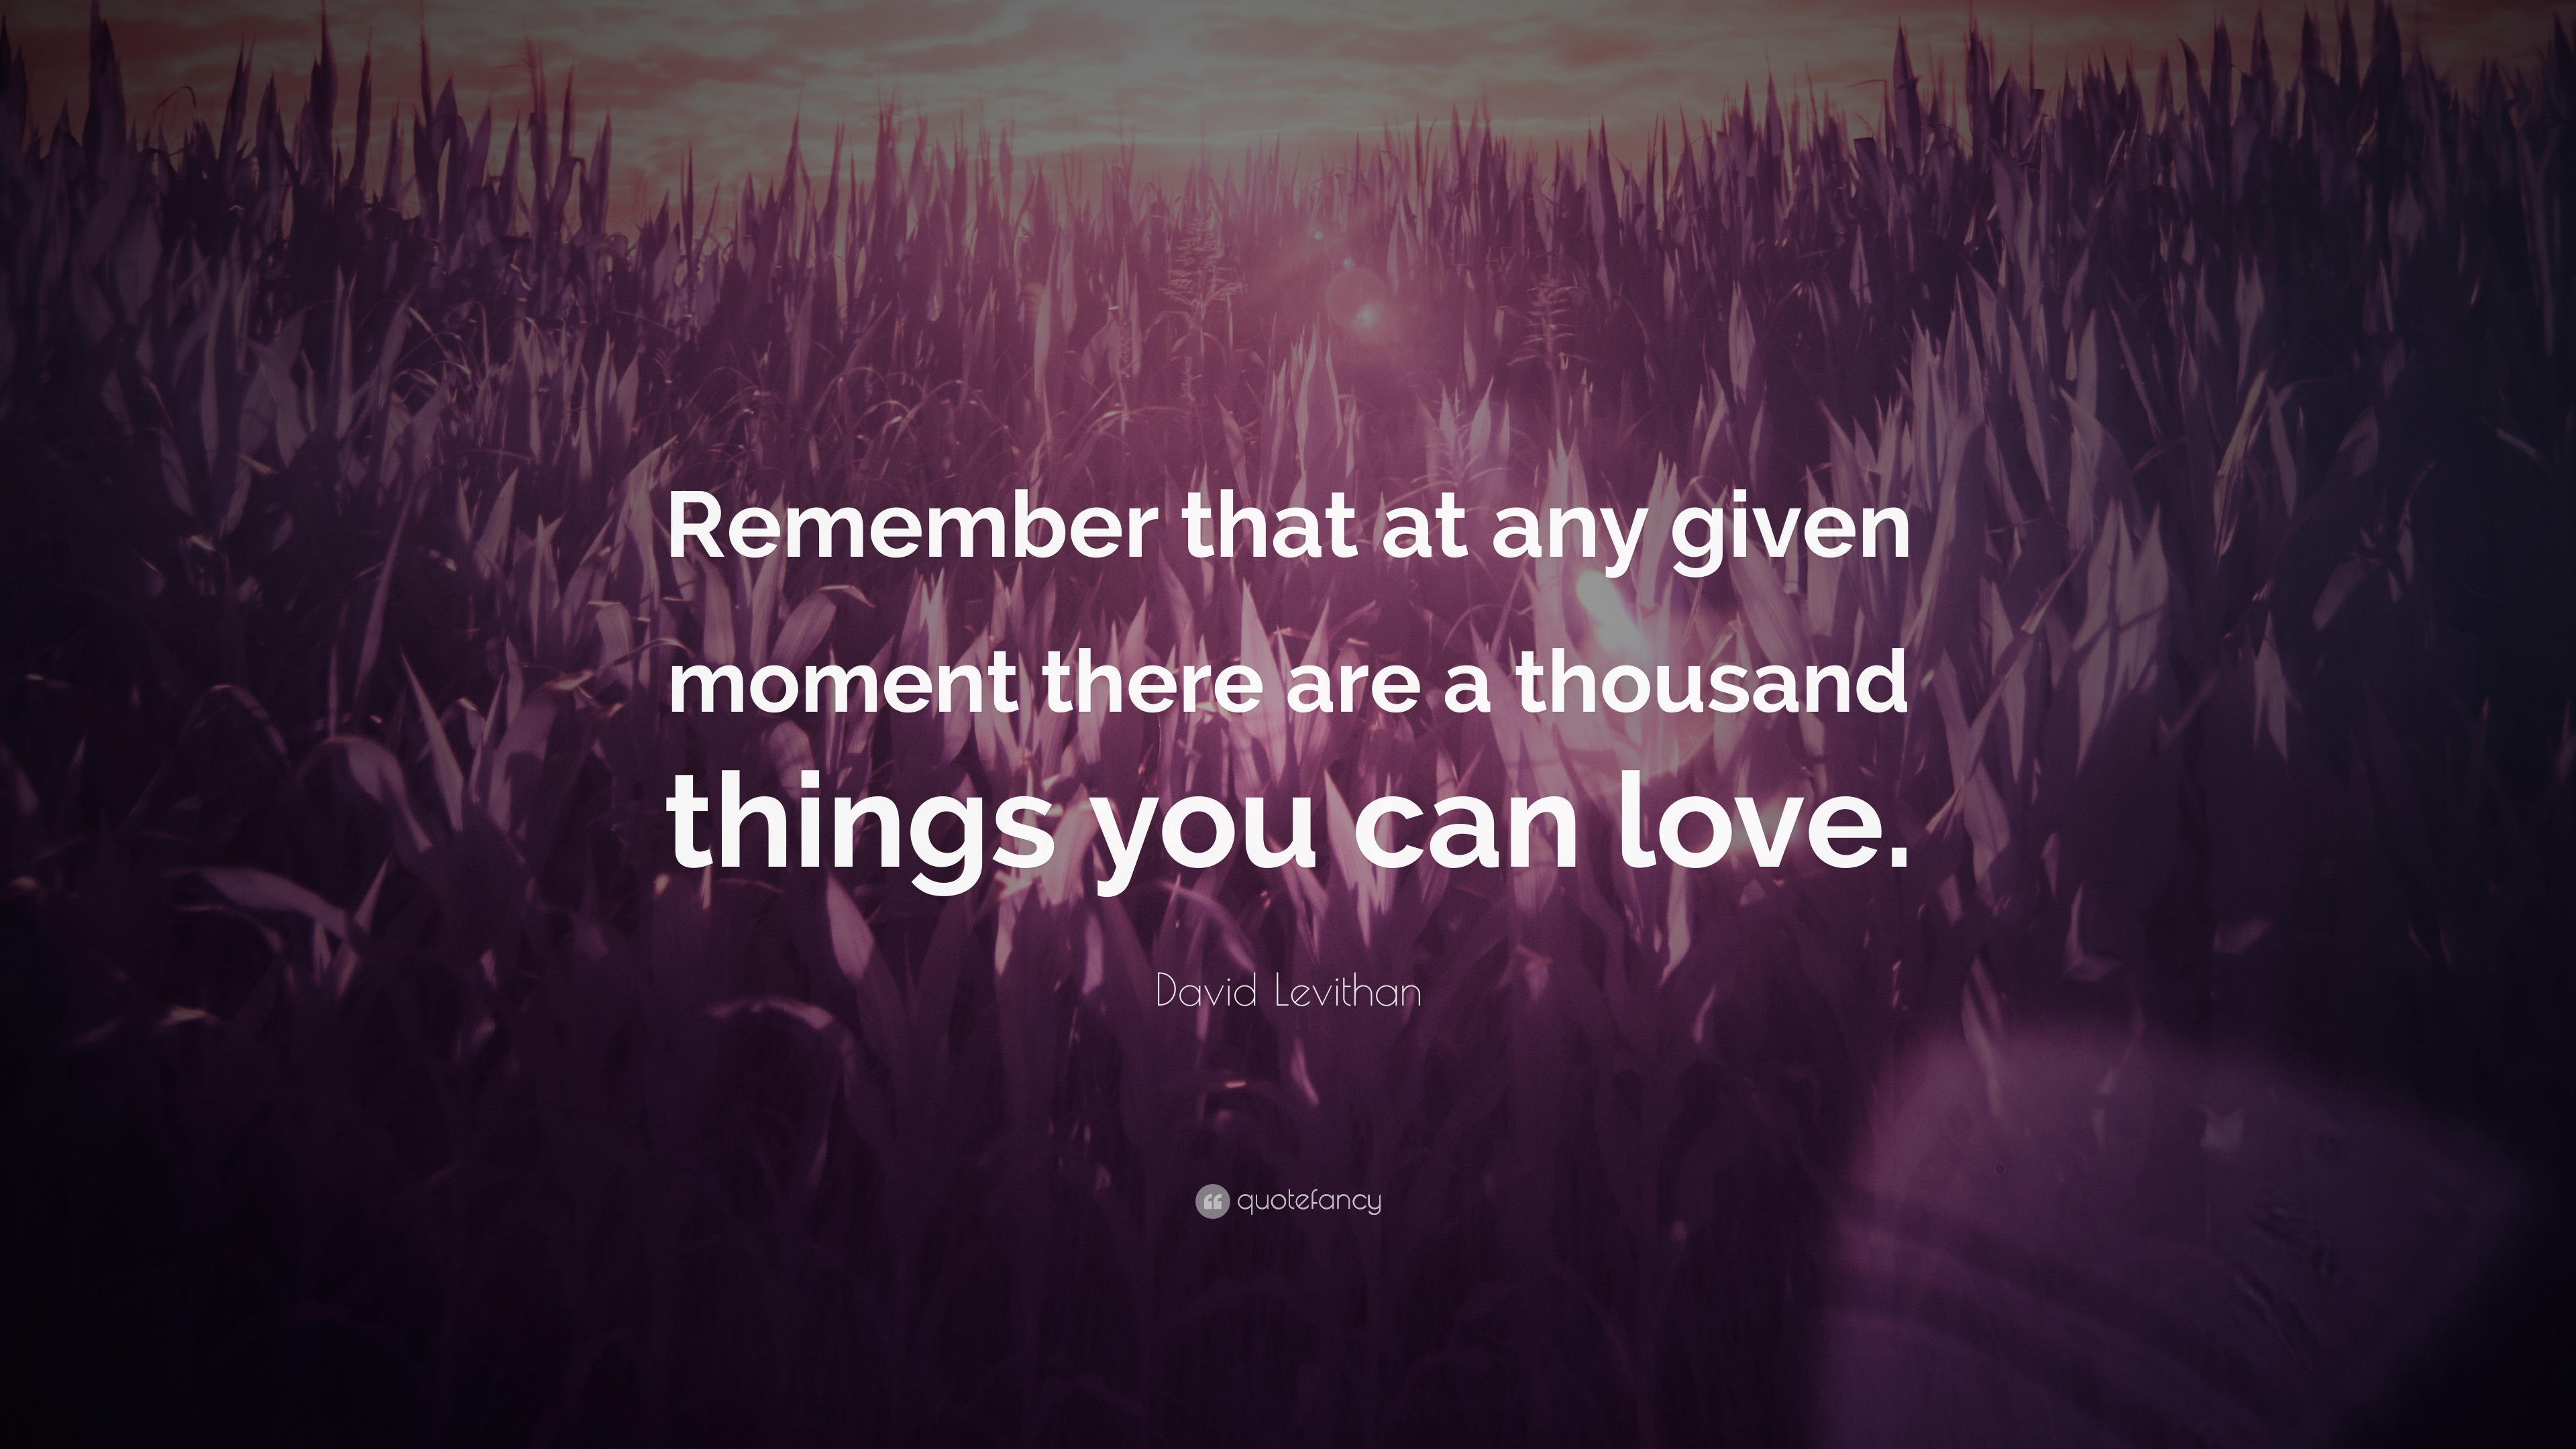 David Levithan Quote “remember That At Any Given Moment There Are A Thousand Things You Can Love” 